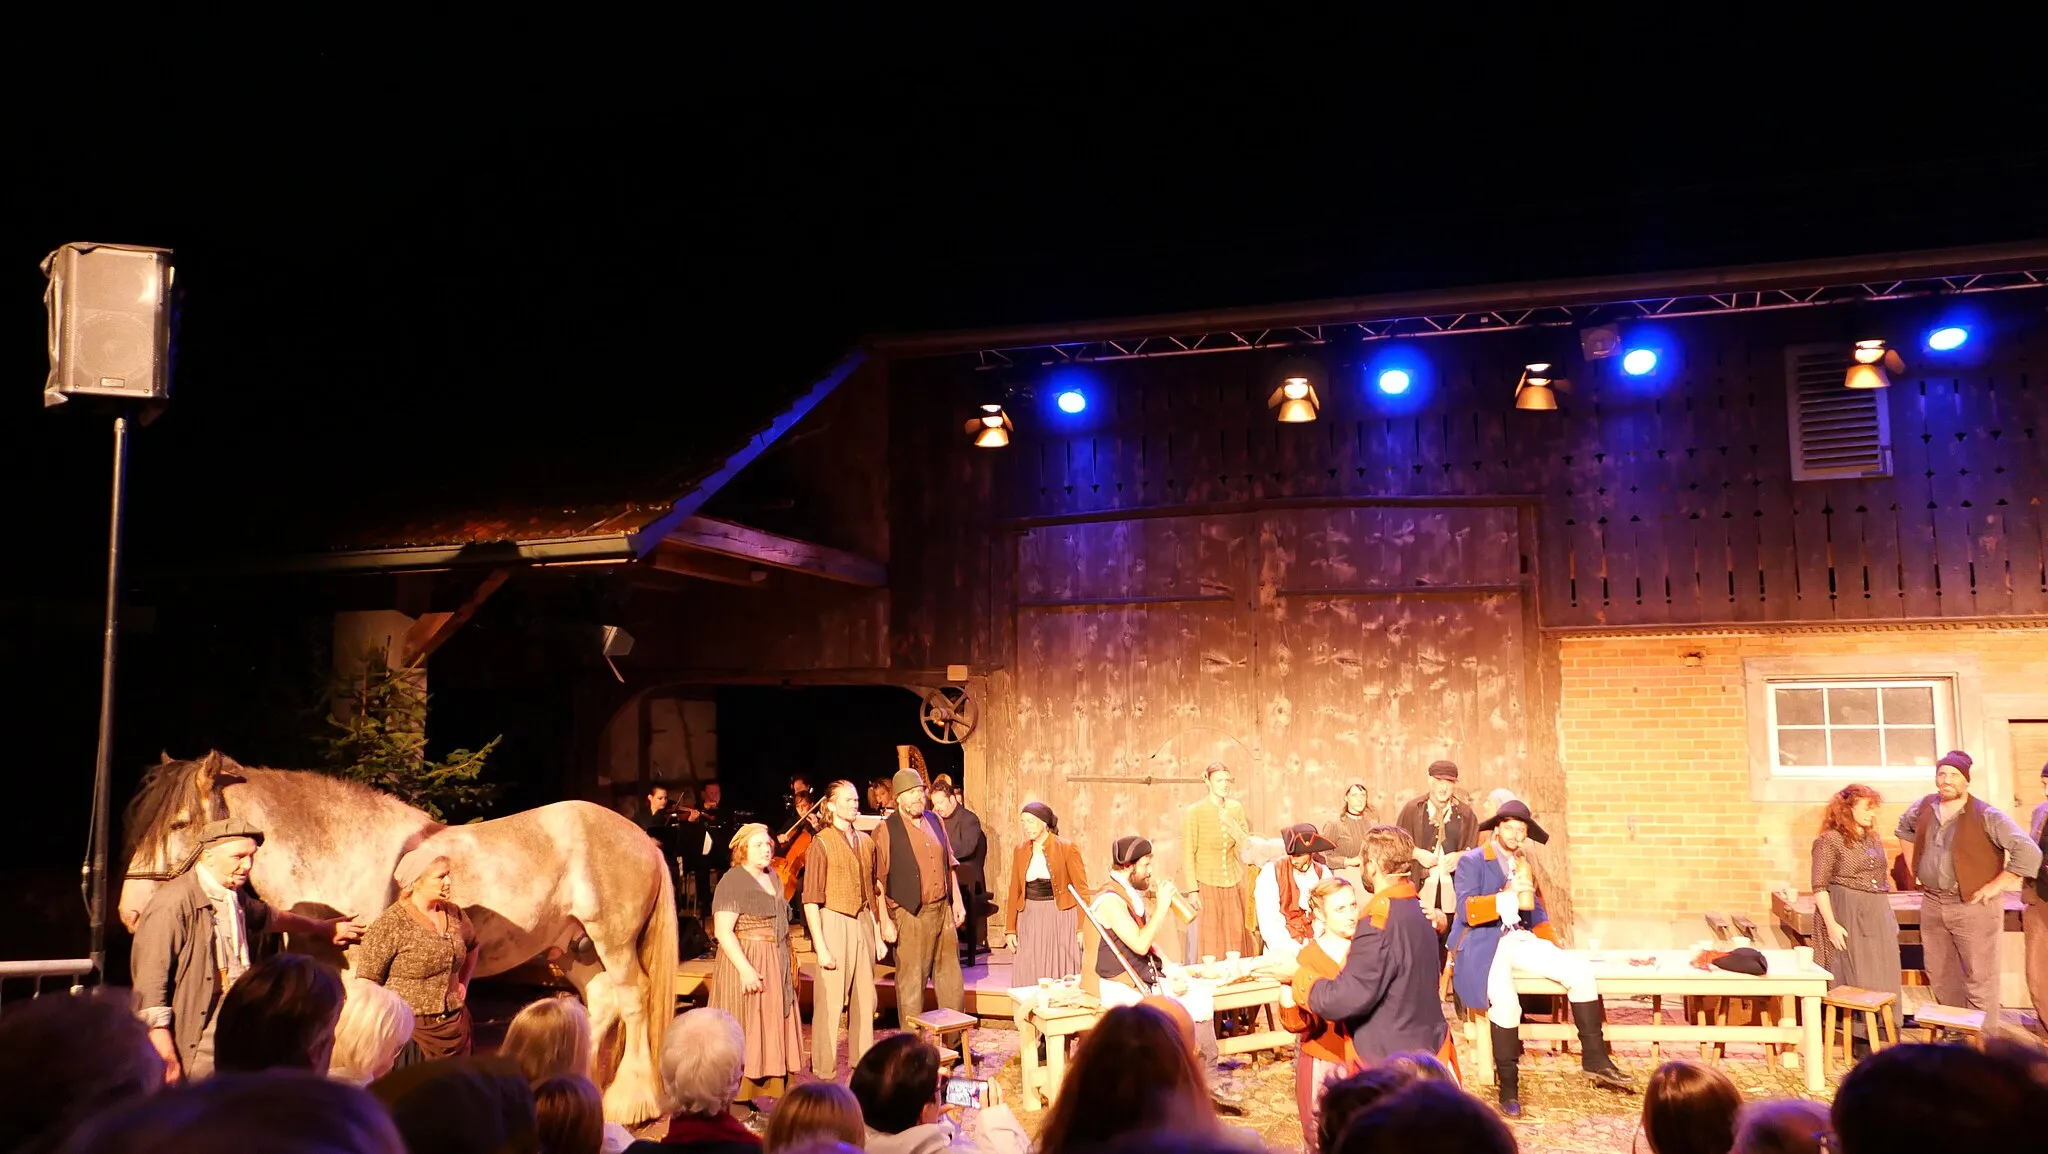 Photo showing: The opening night of the musical "The Tigress of Weiach" about the local battles of the French Revolutionary Wars in 1799/1800. The production was commissioned by the municipality of Weiach in the canton of Zurich (Switzerland) to celebrate the 750th anniversary of the first documentary mention of the village. Script written by Mathias Reiter, music composed by Raimund Wiederkehr and play directed by Jeannot Hunziker.